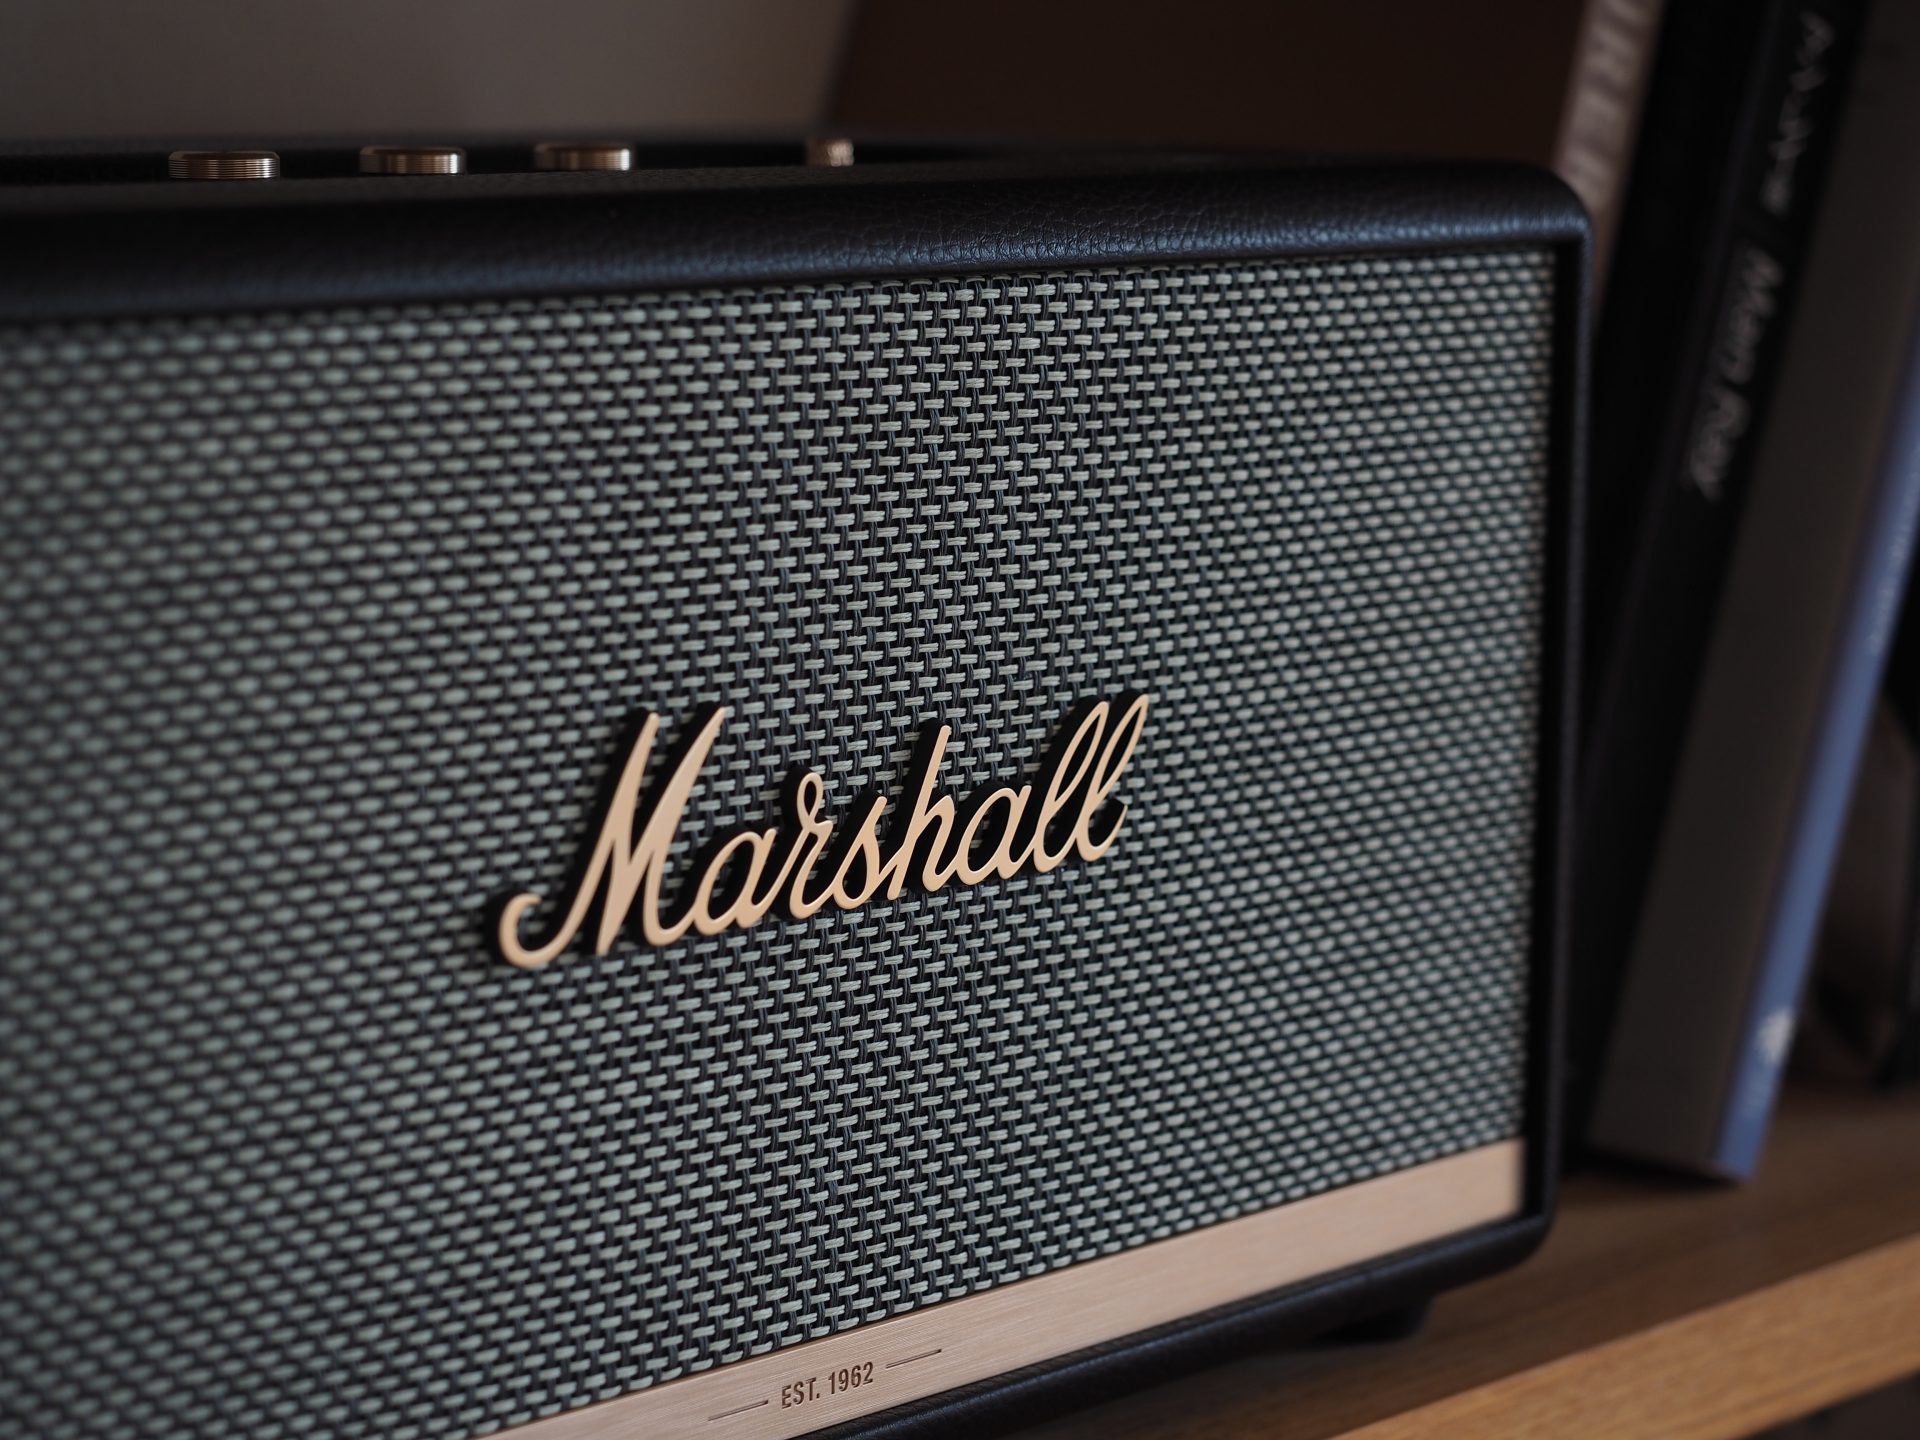 marshall stanmoreⅡ 斜め